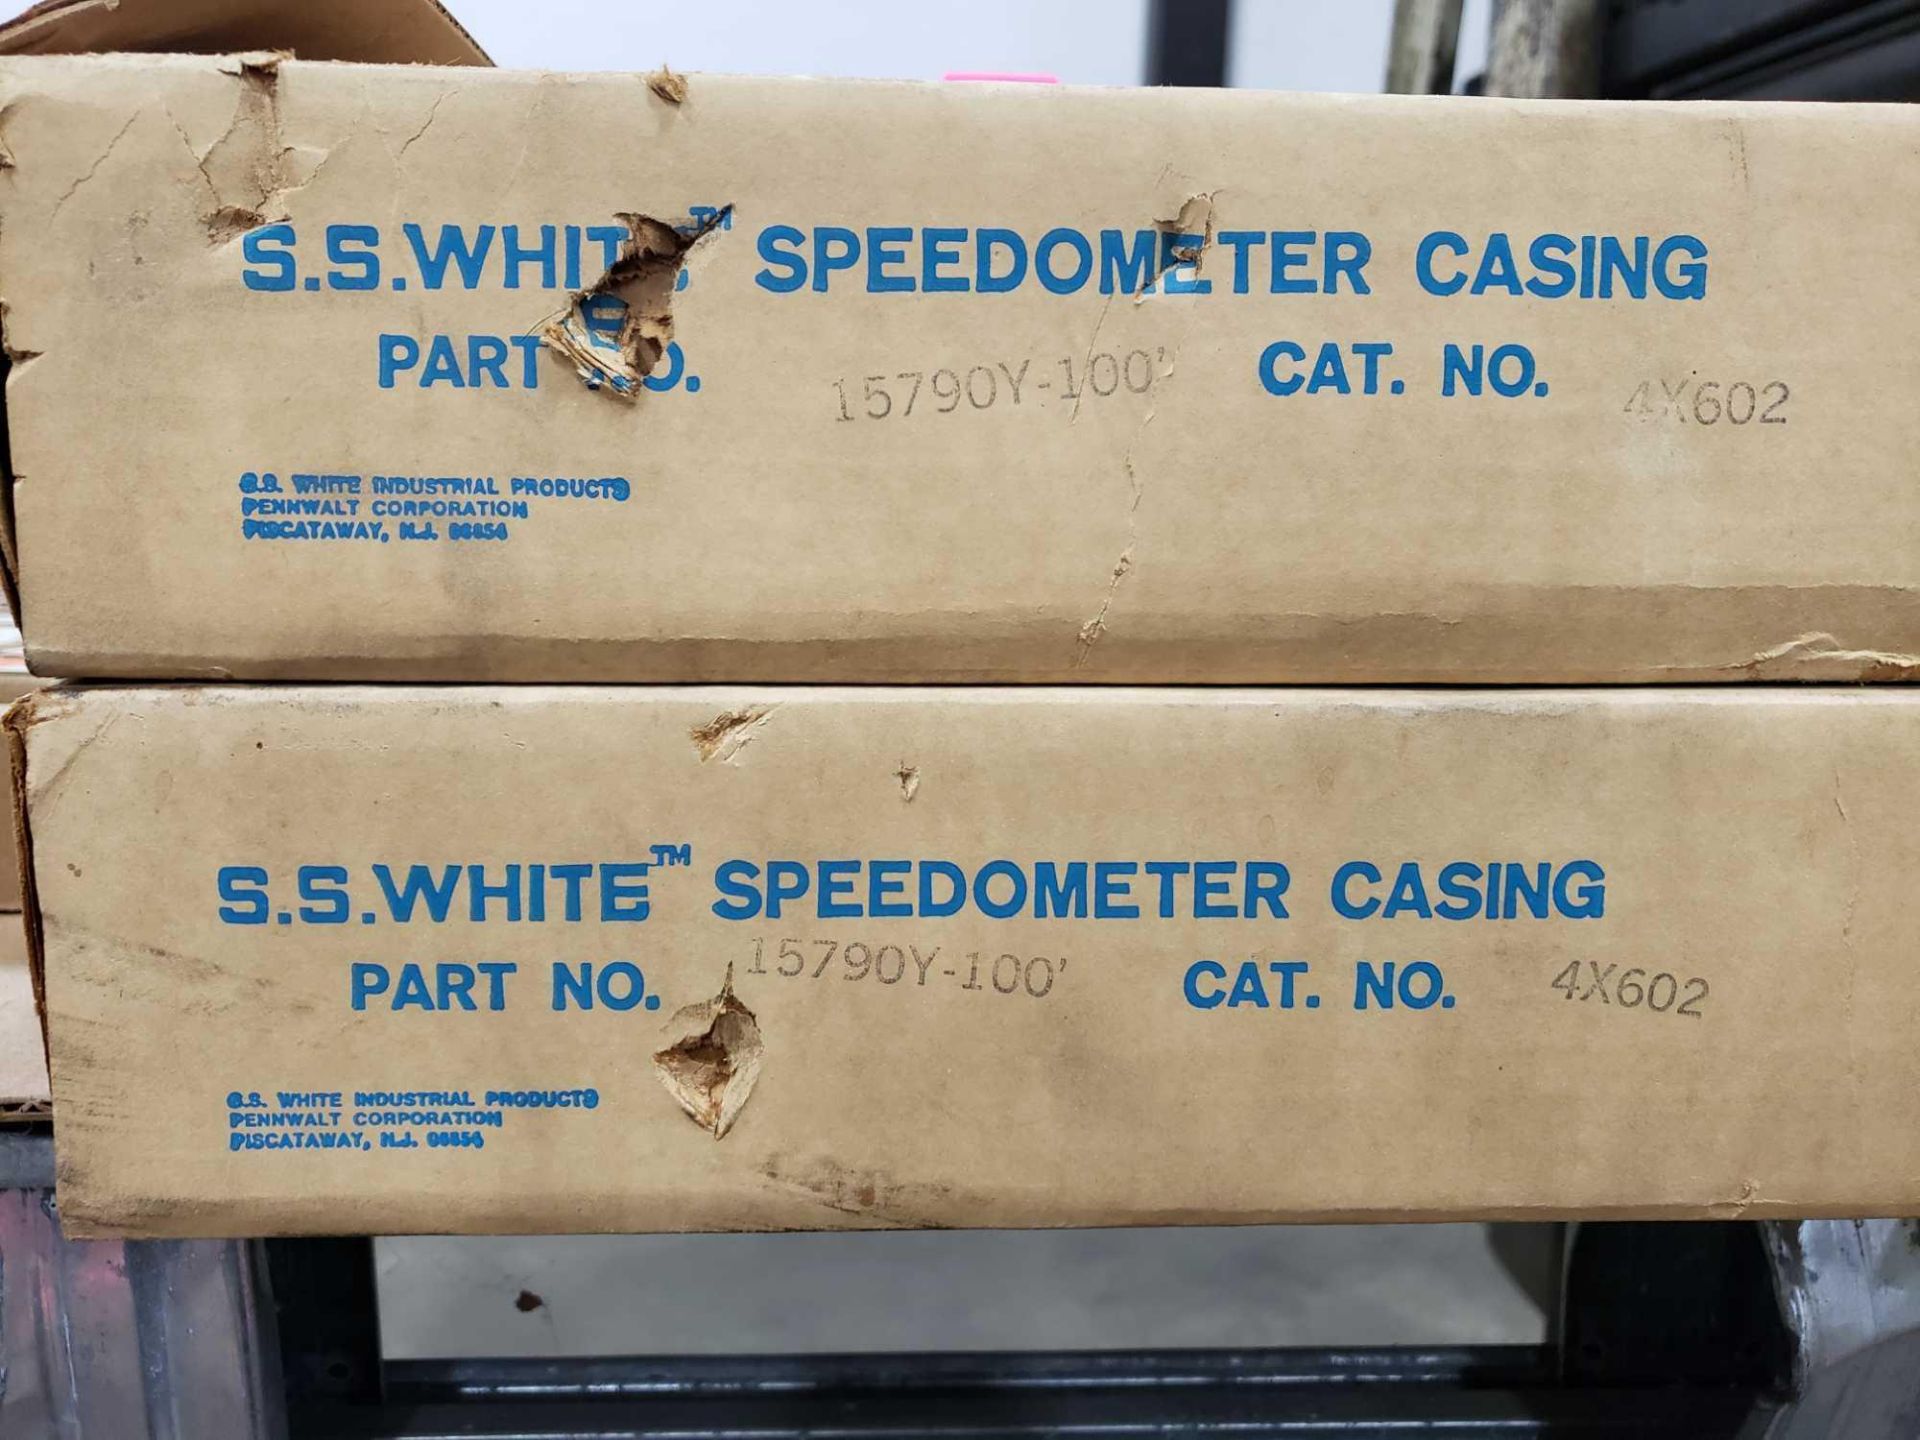 SS White speedometer casing catalog 4X602. New in box. - Image 2 of 2